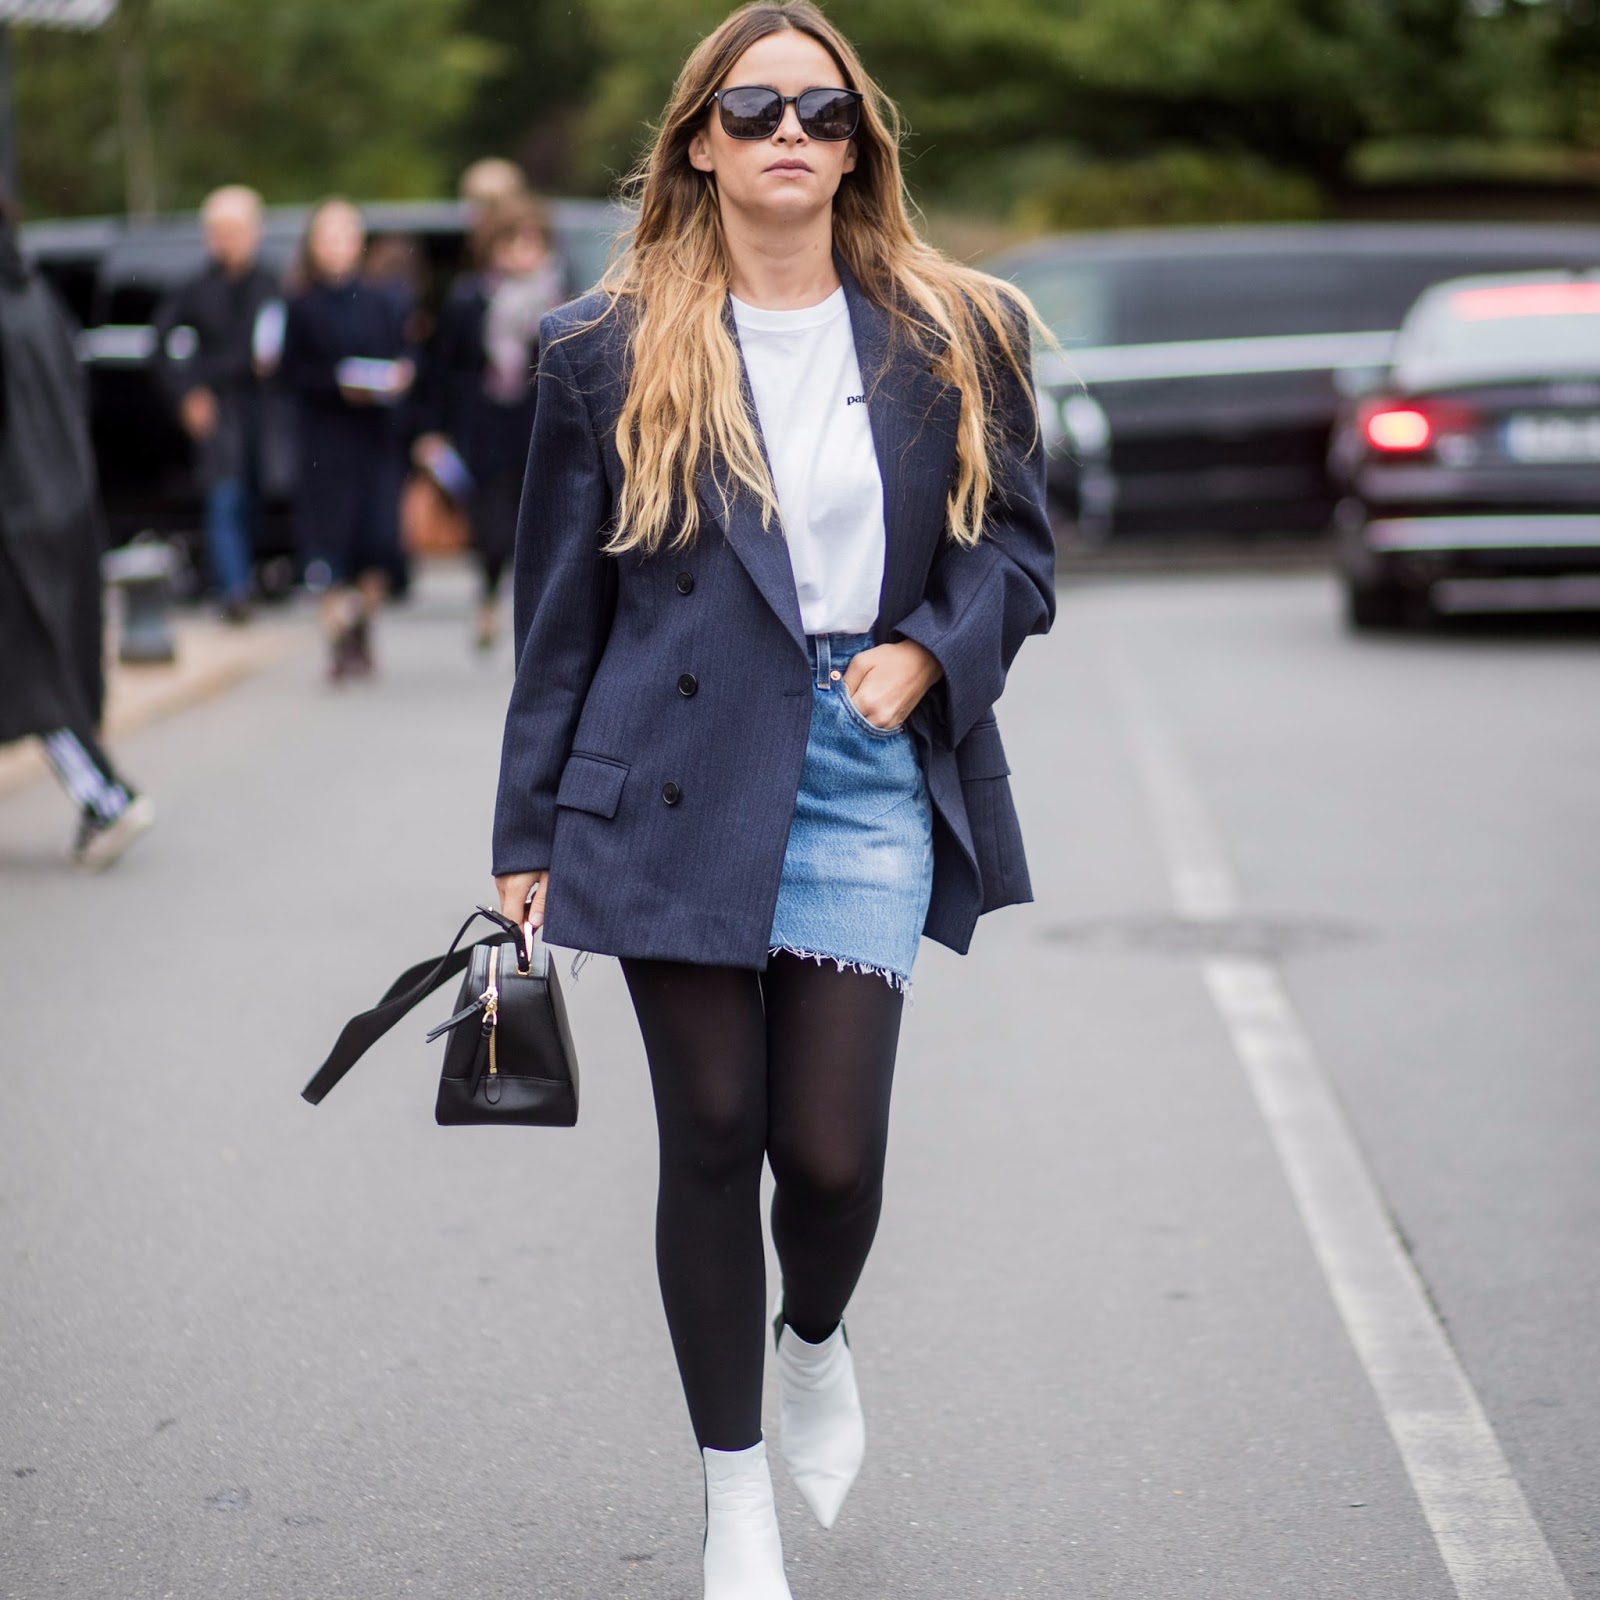 7 fun (and grown-up) ways to wear tights this season From embracing ...